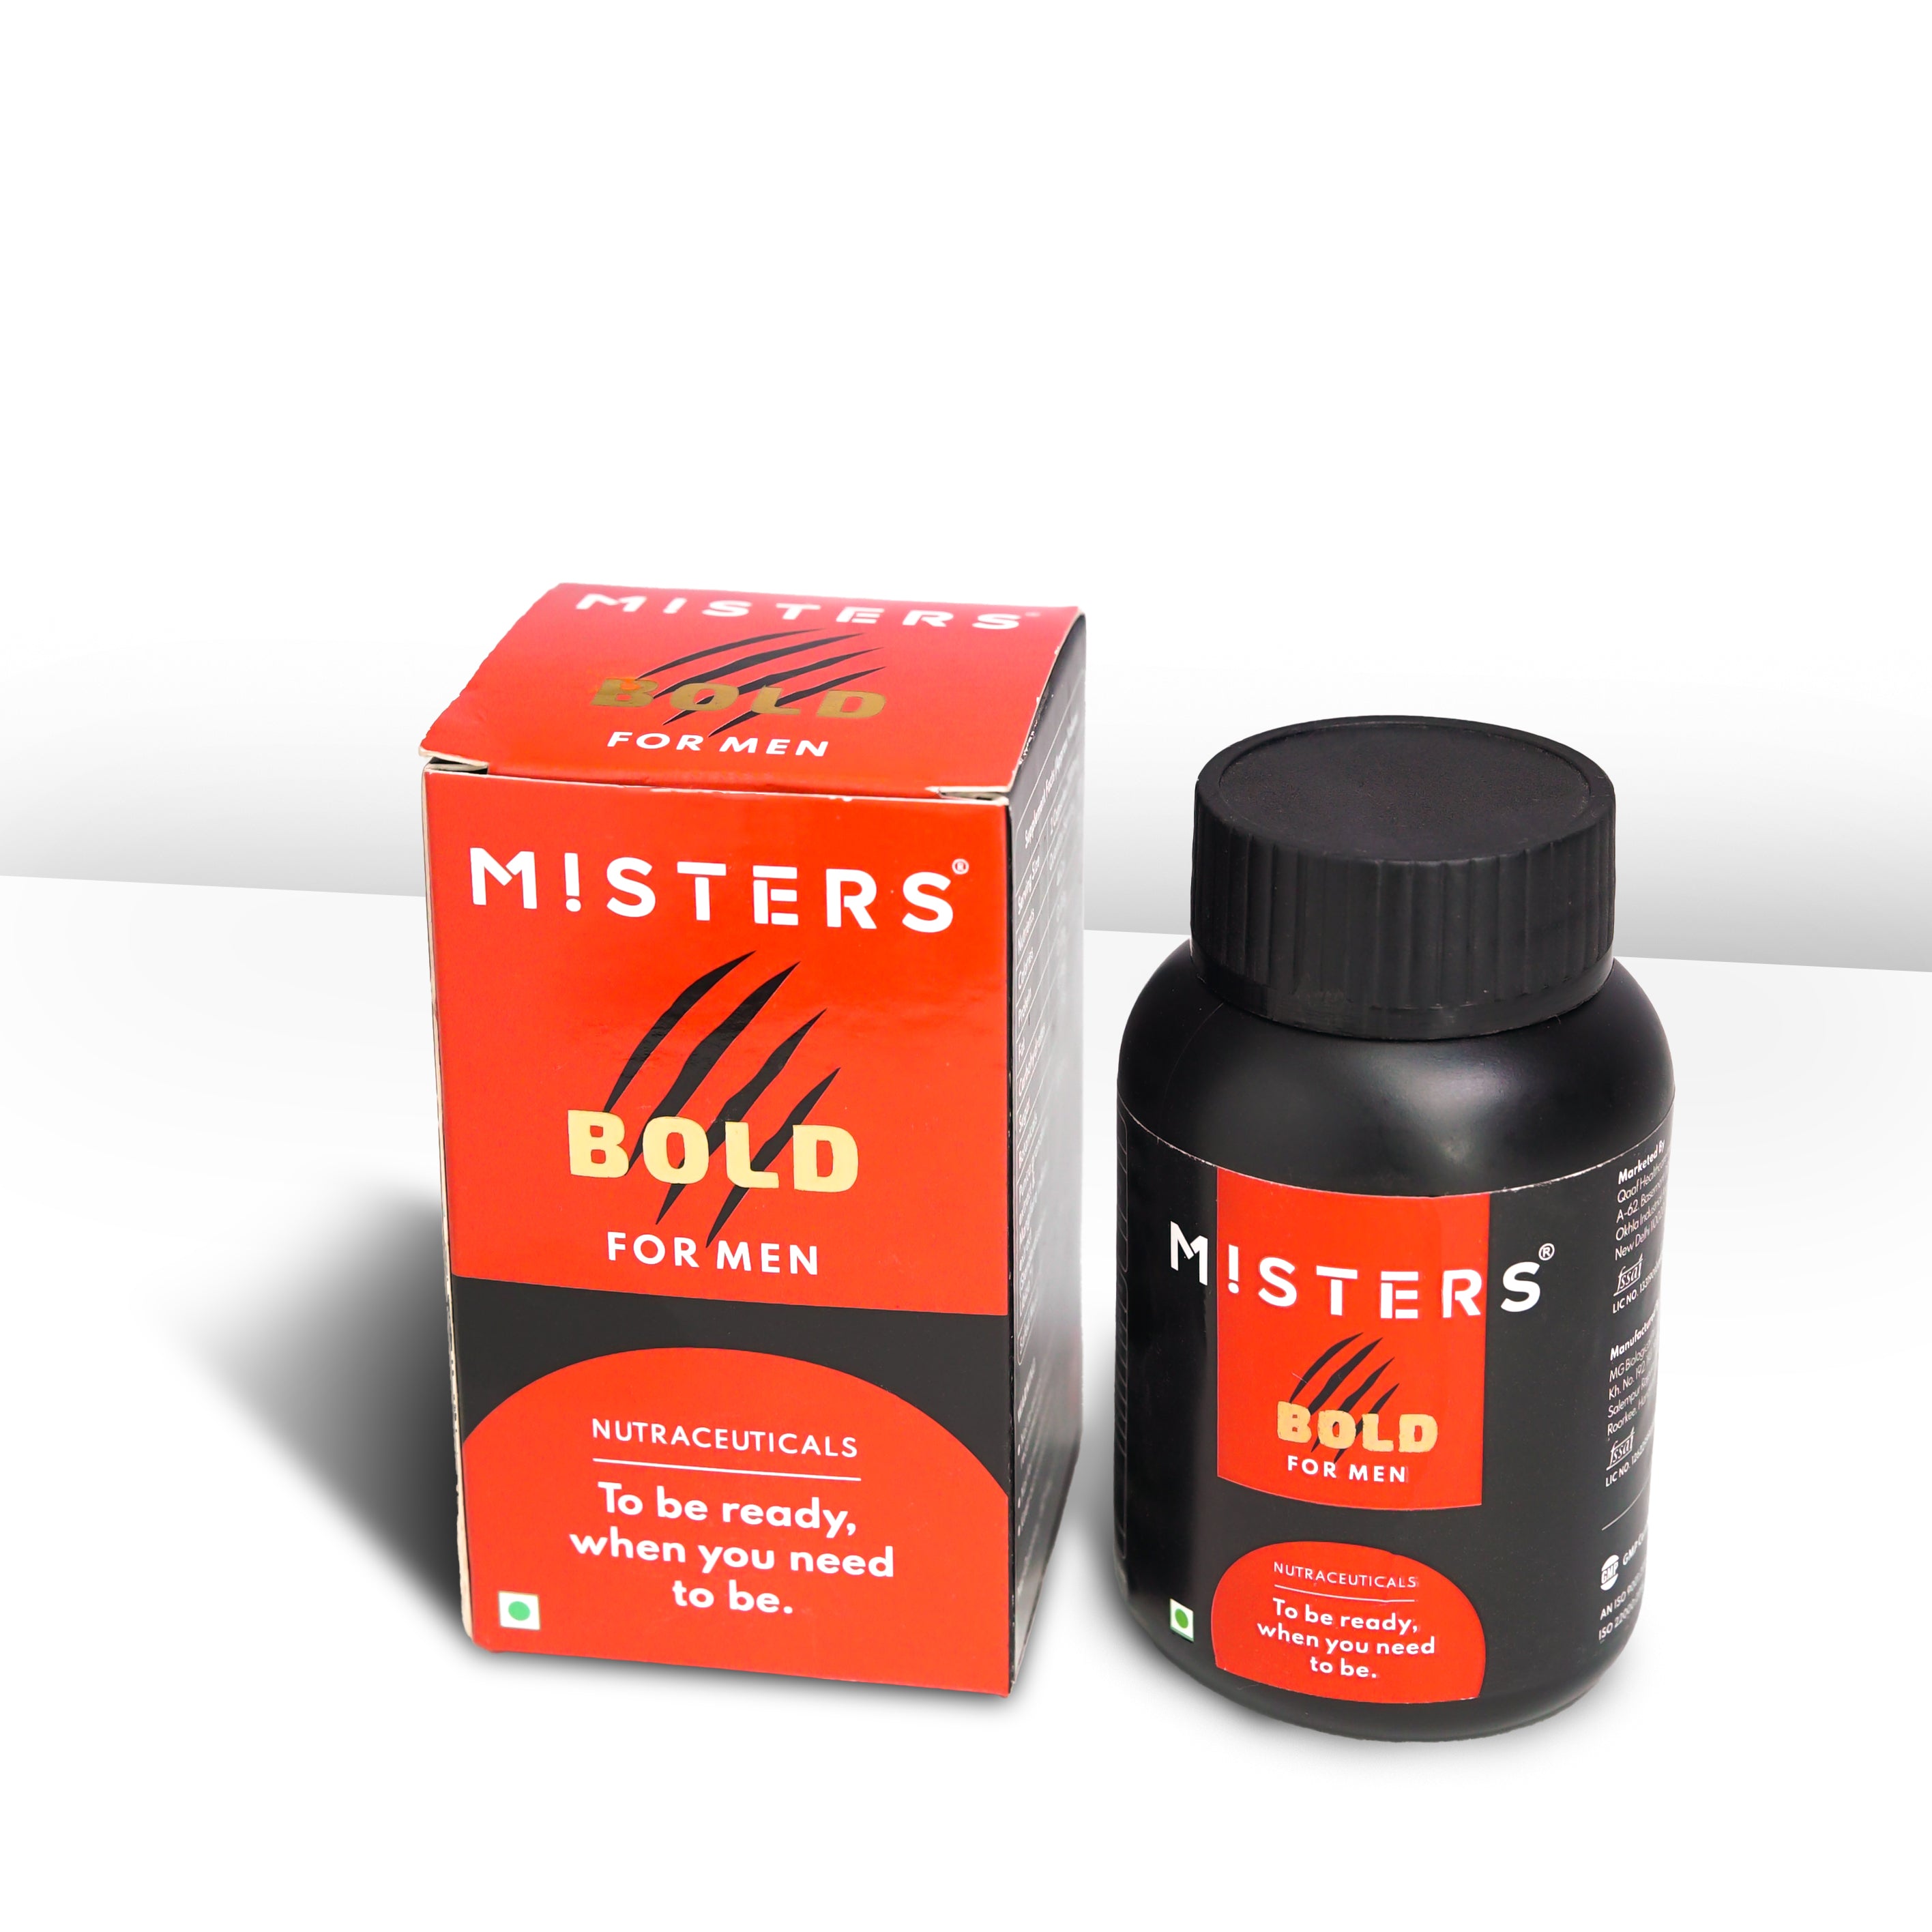 Misters Daily Bold for Men (60 Capsules)